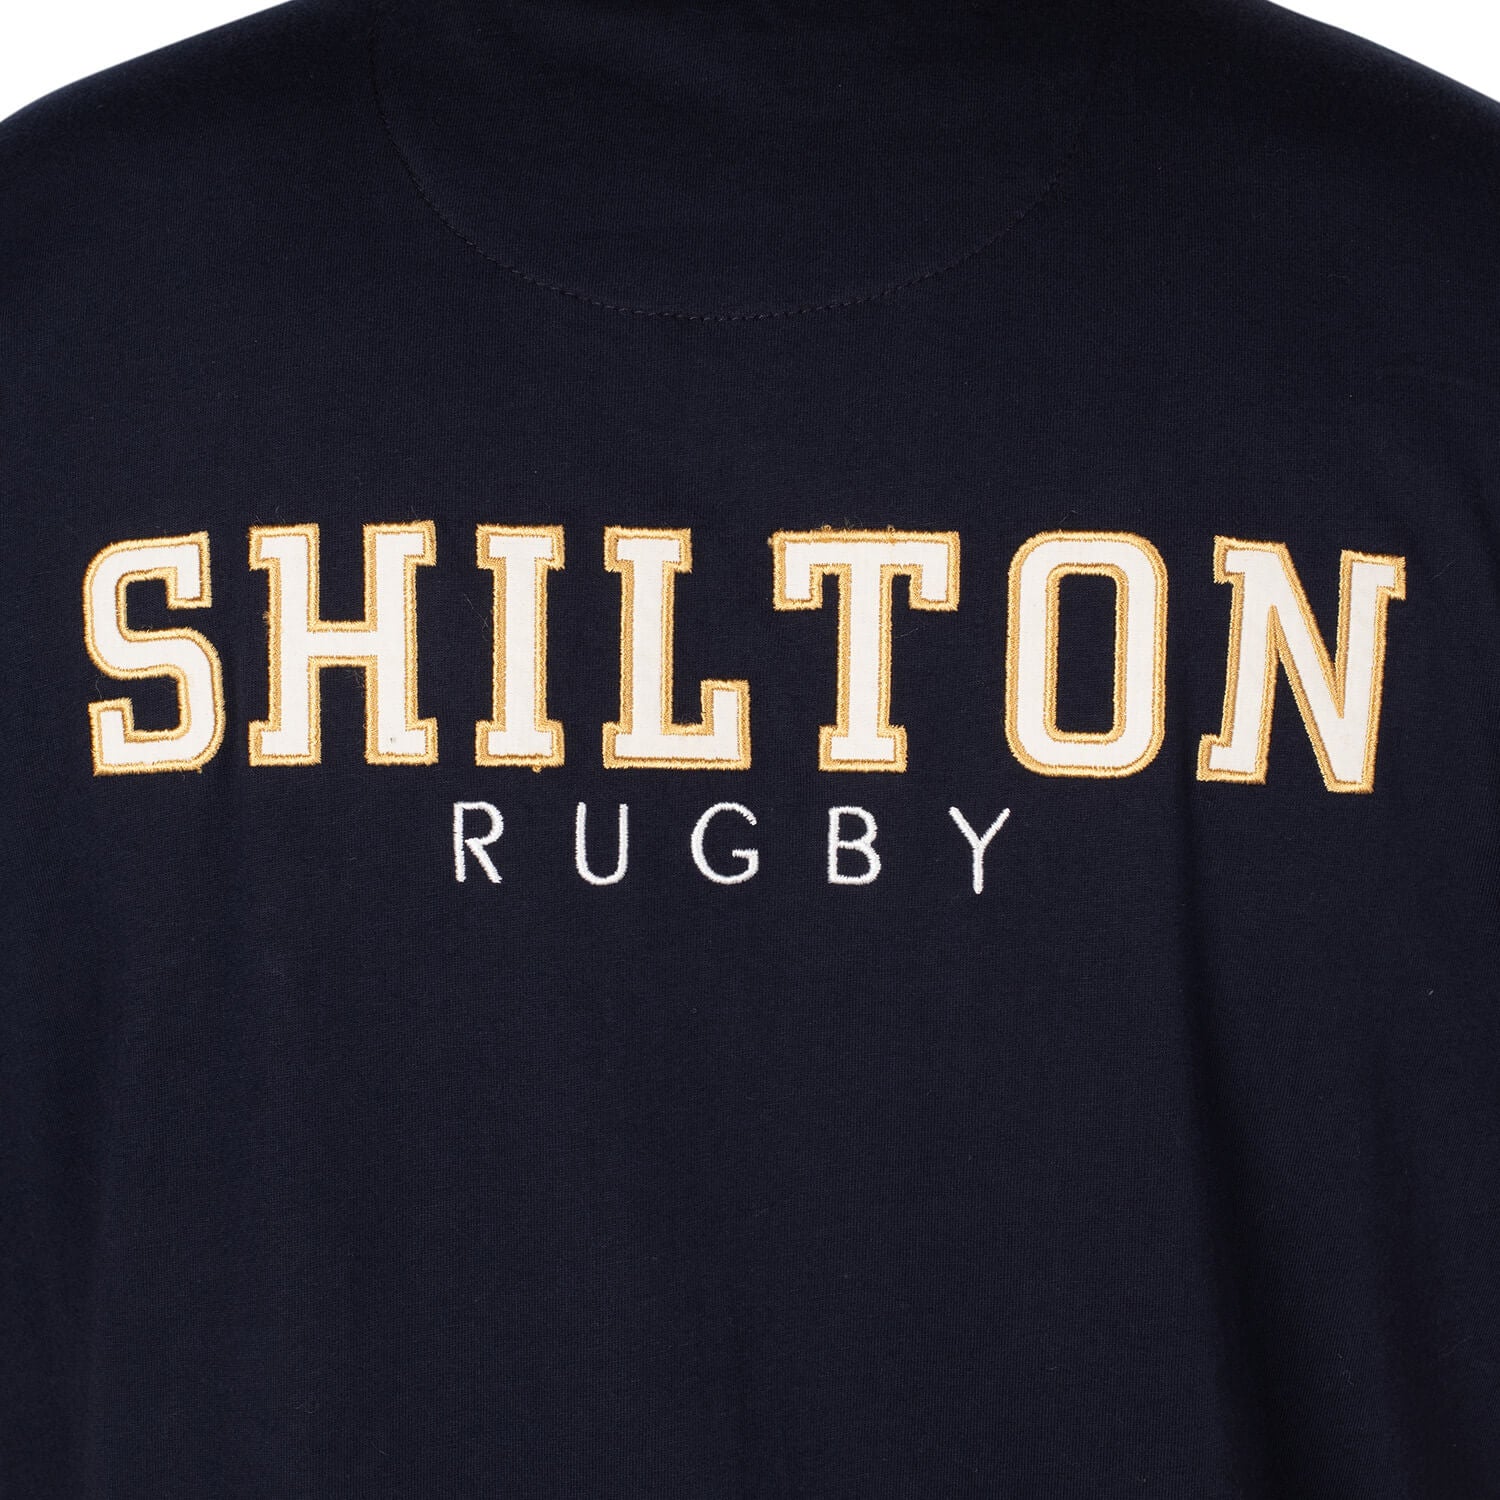 T-shirt rugby nations